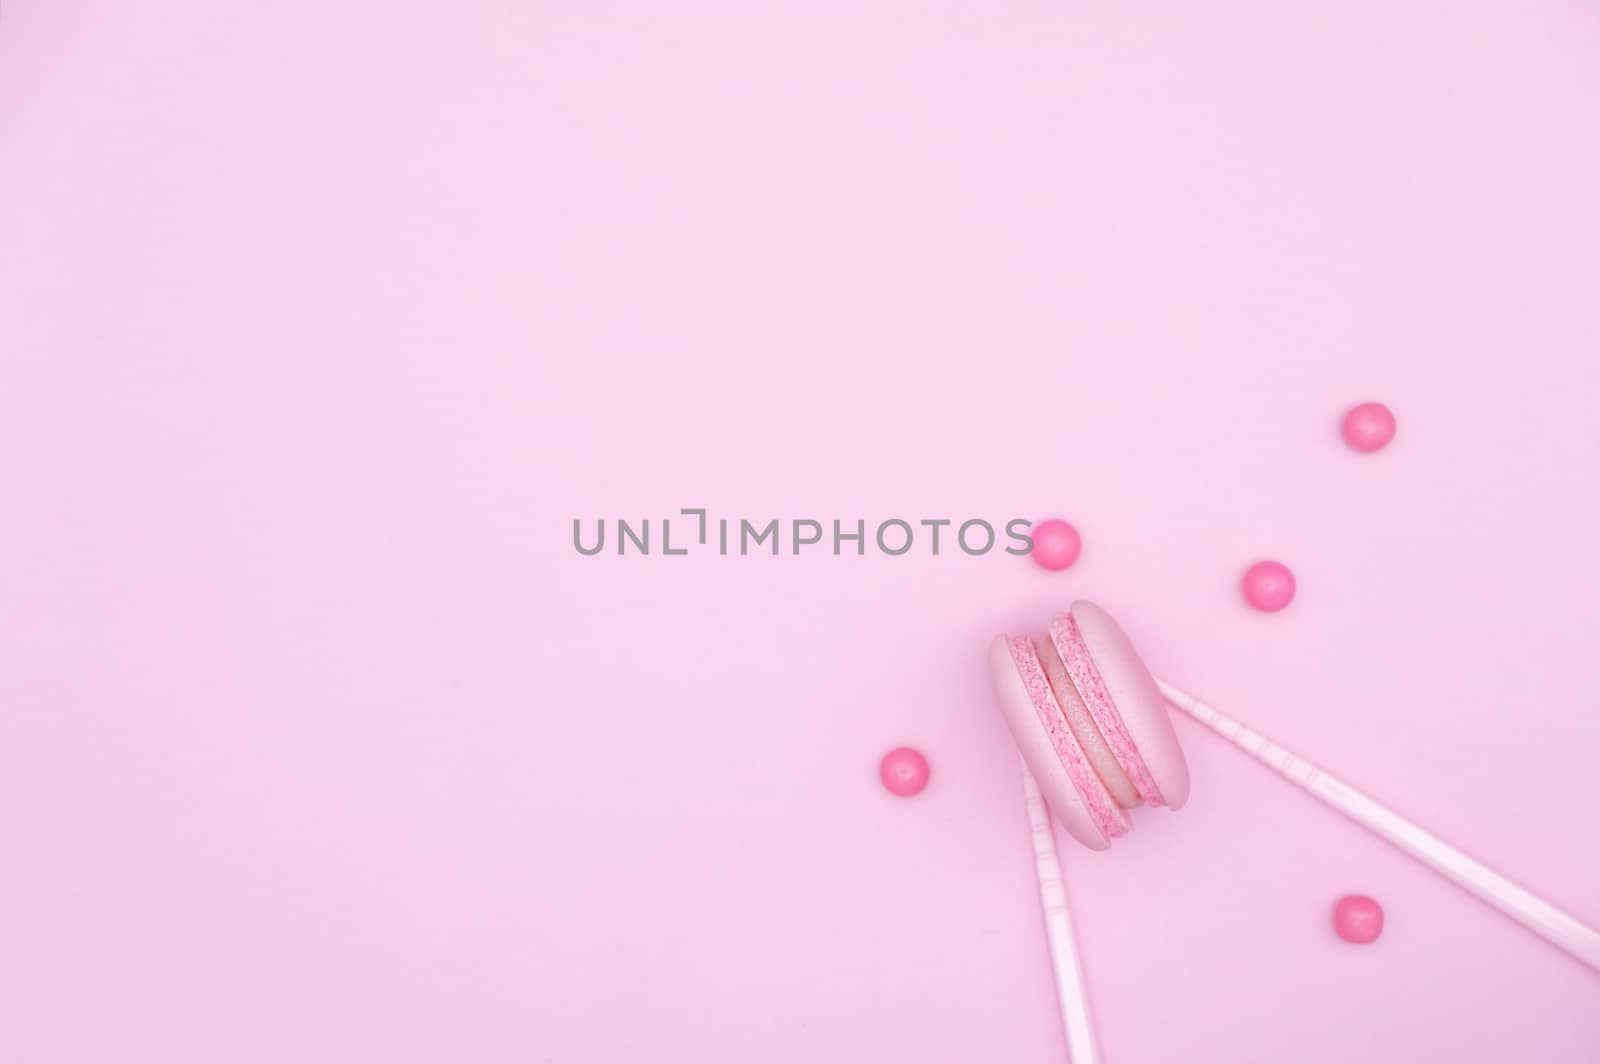 macarons on pink background, Beautiful dessert, Flat lay style with copy space to write.